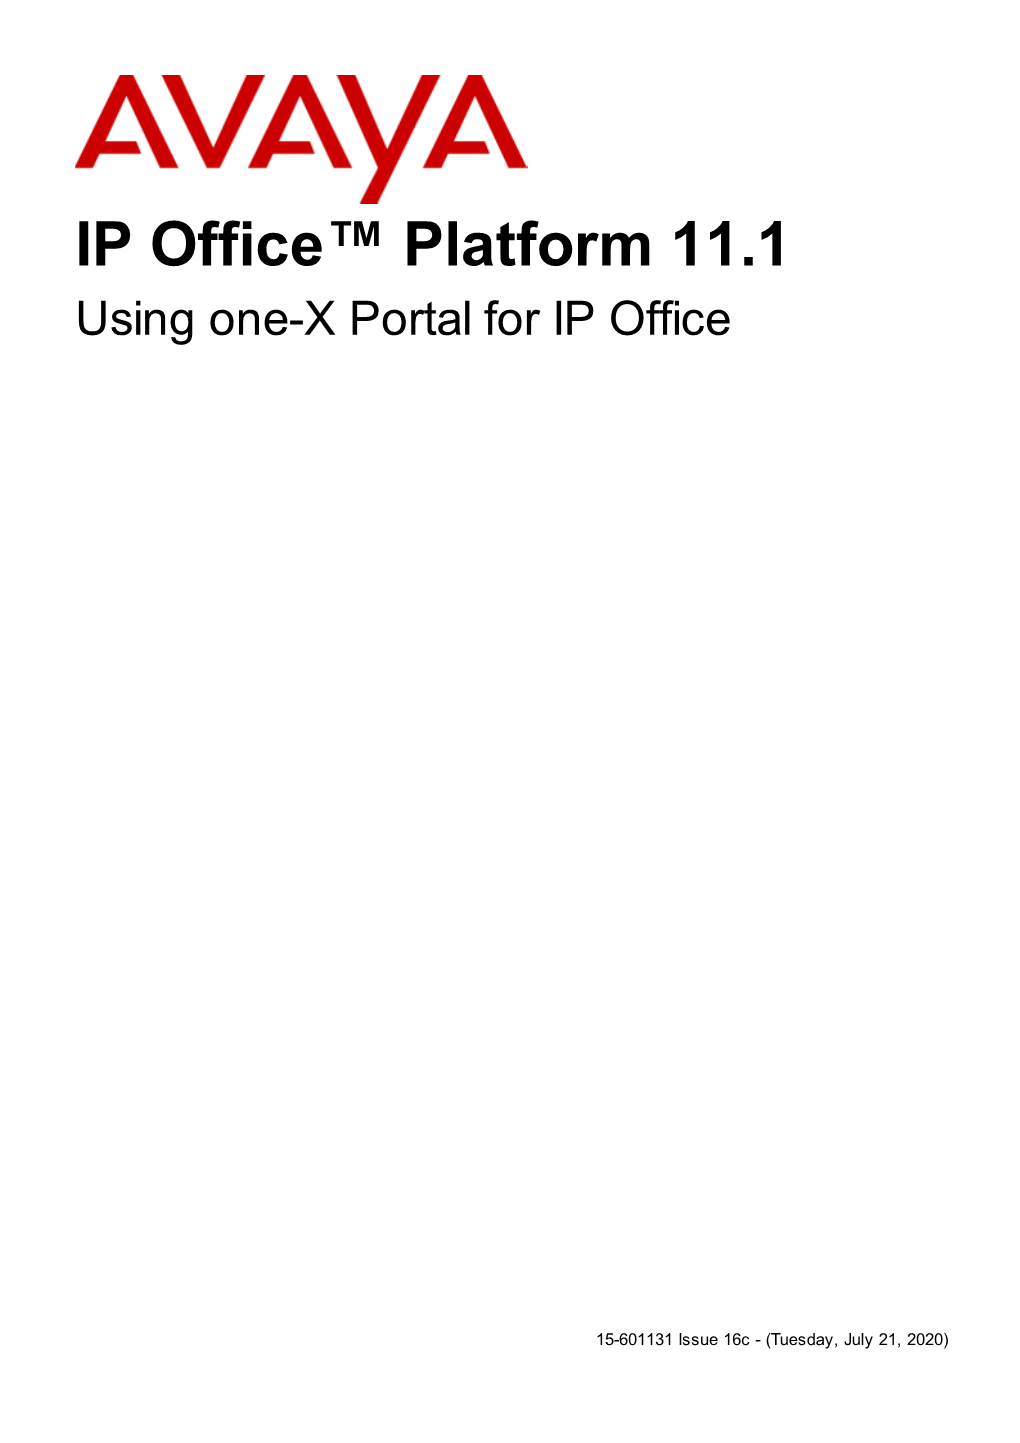 Using One-X Portal for IP Office